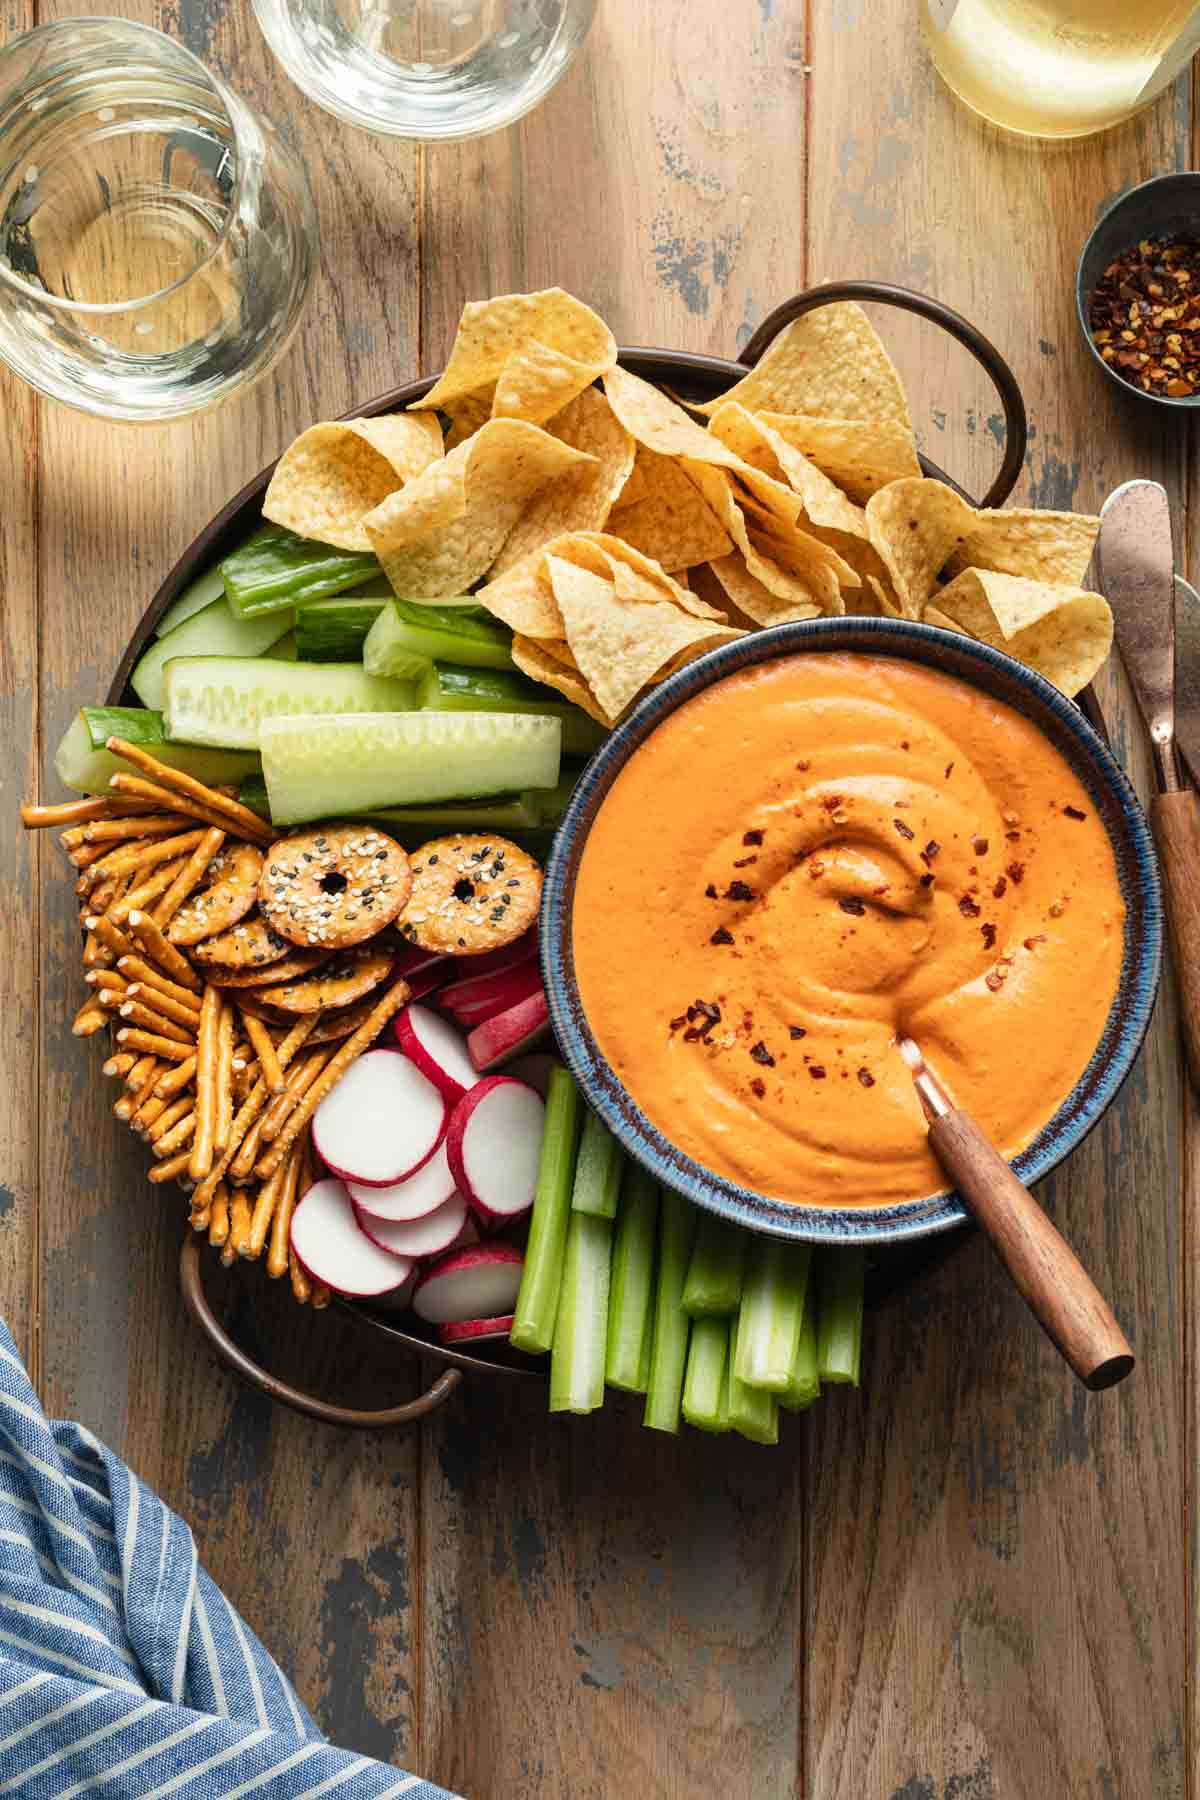 Overhead view of roasted pepper dip served with a tray of veggies, chips and pretzels.